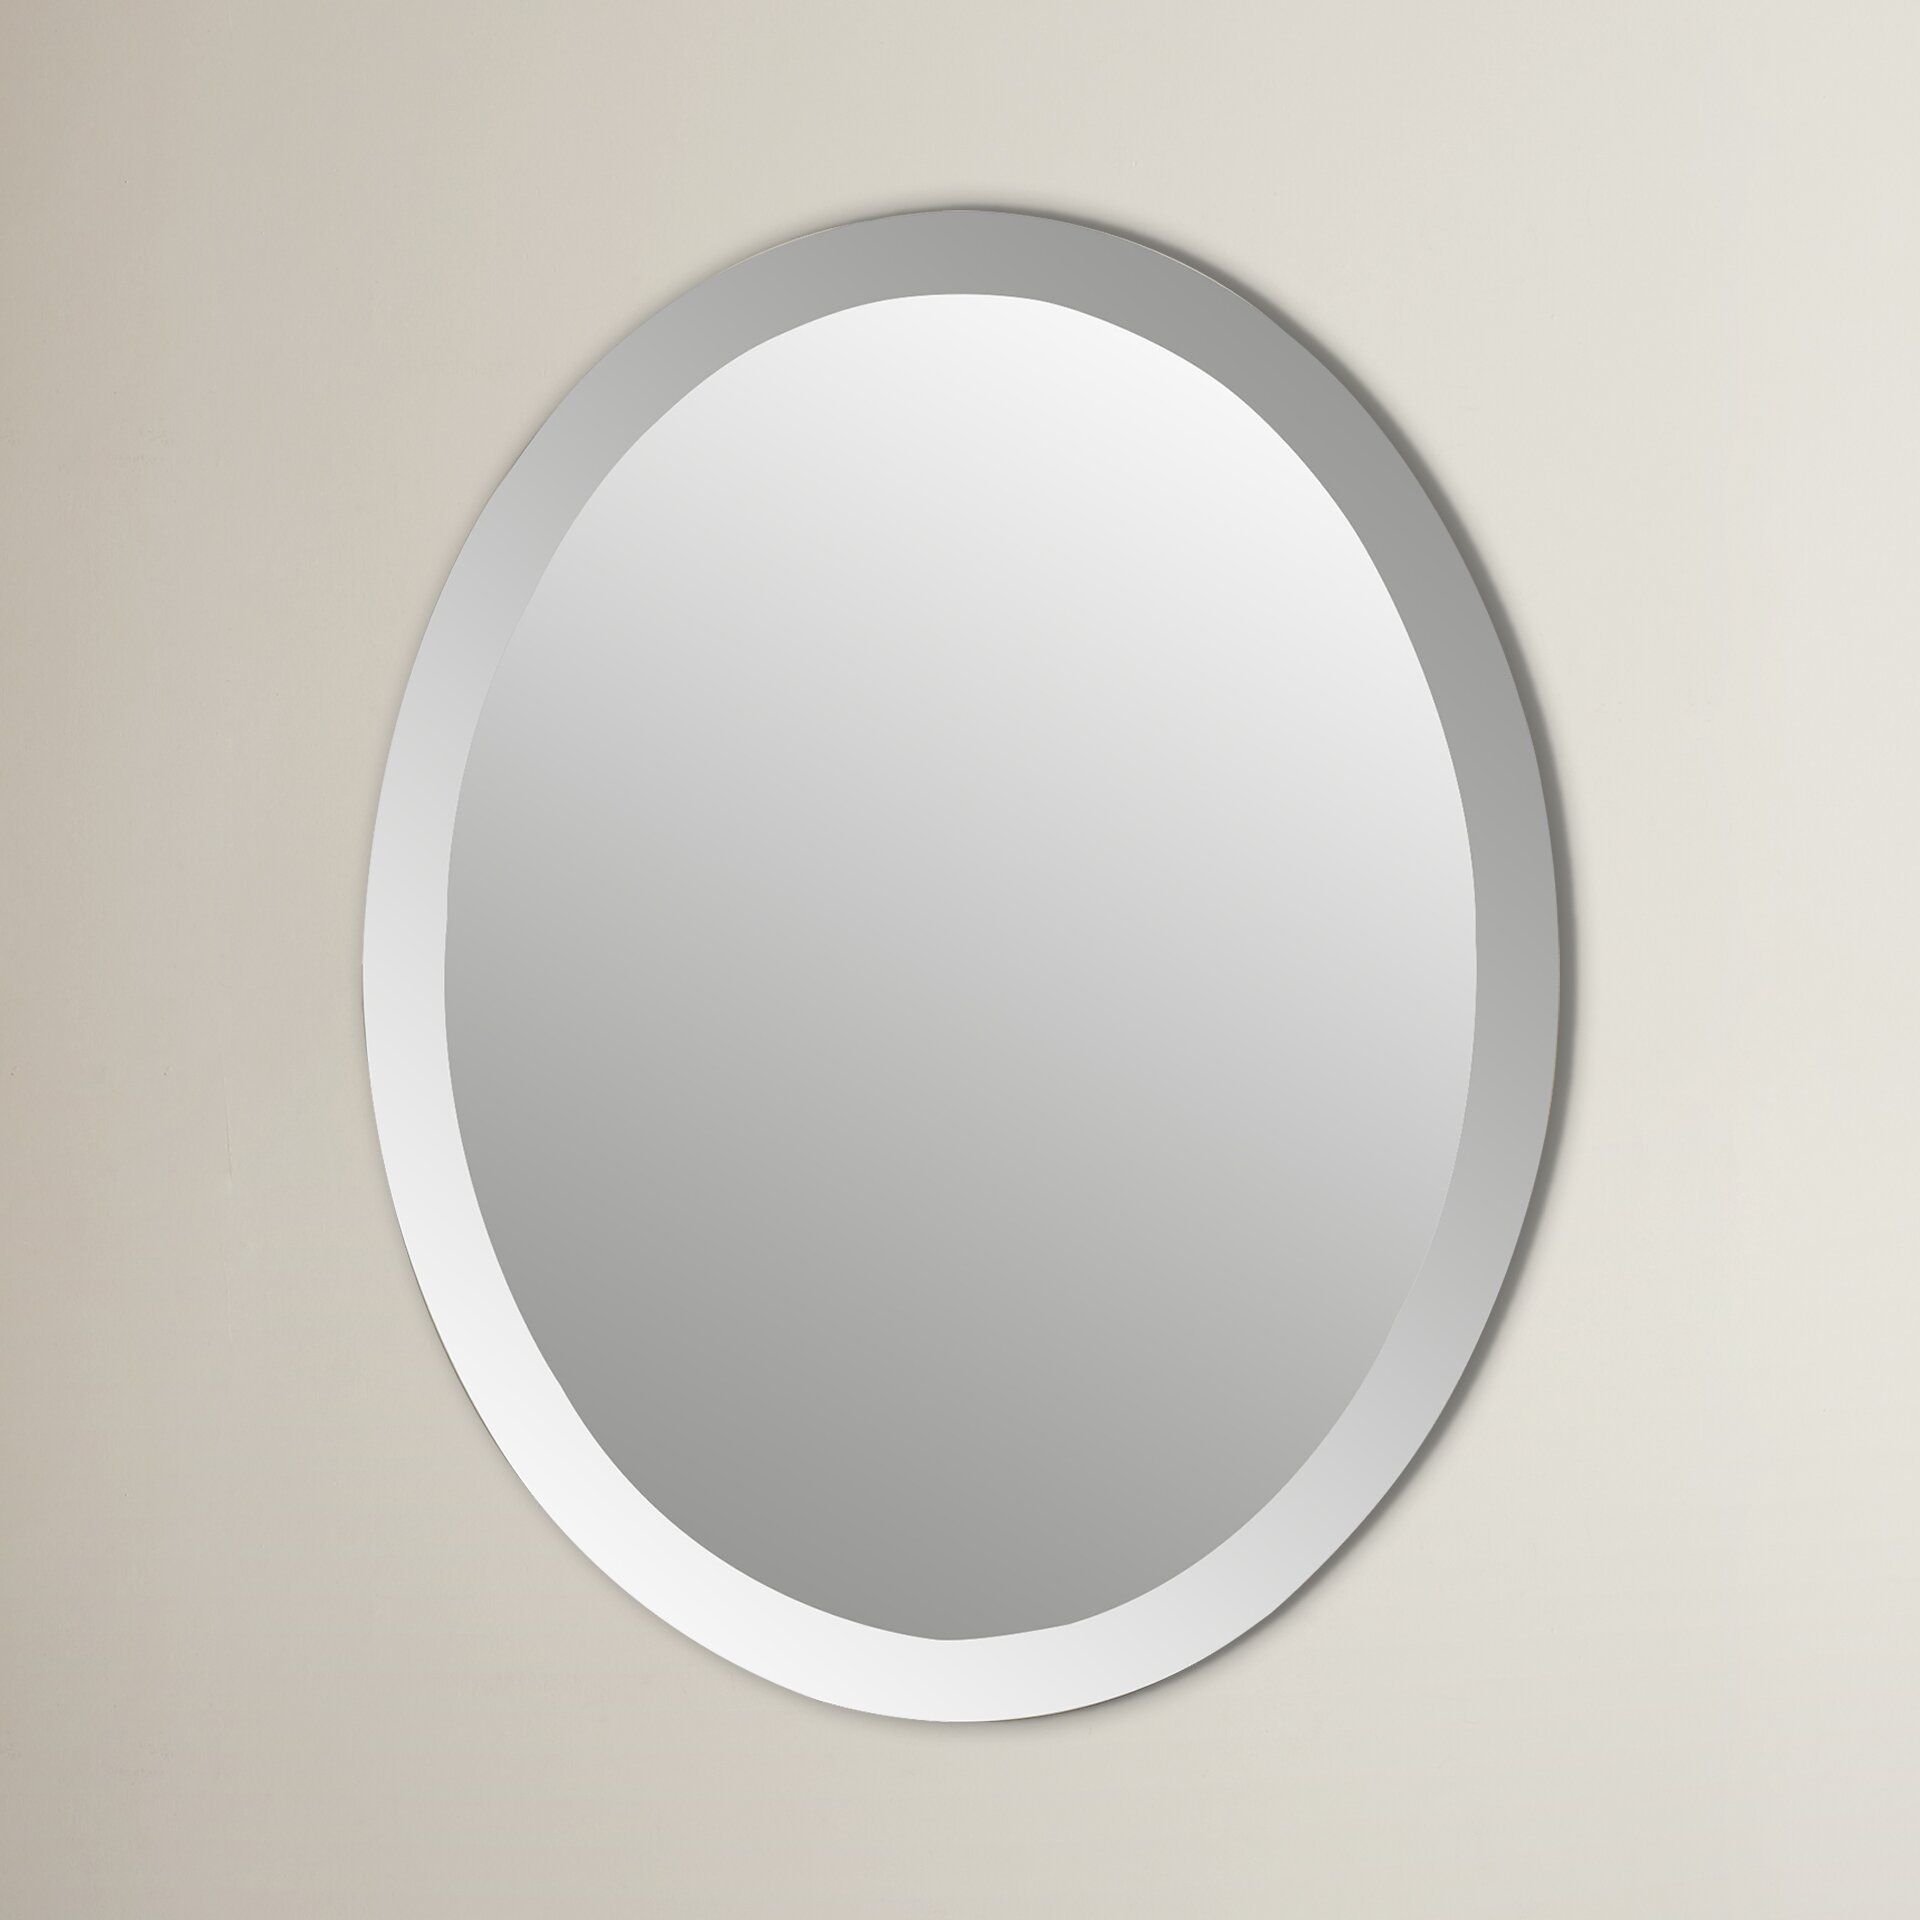 Wade Logan Duane Oval Bevel Frameless Wall Mirror & Reviews | Wayfair For Oval Beveled Wall Mirrors (View 4 of 15)